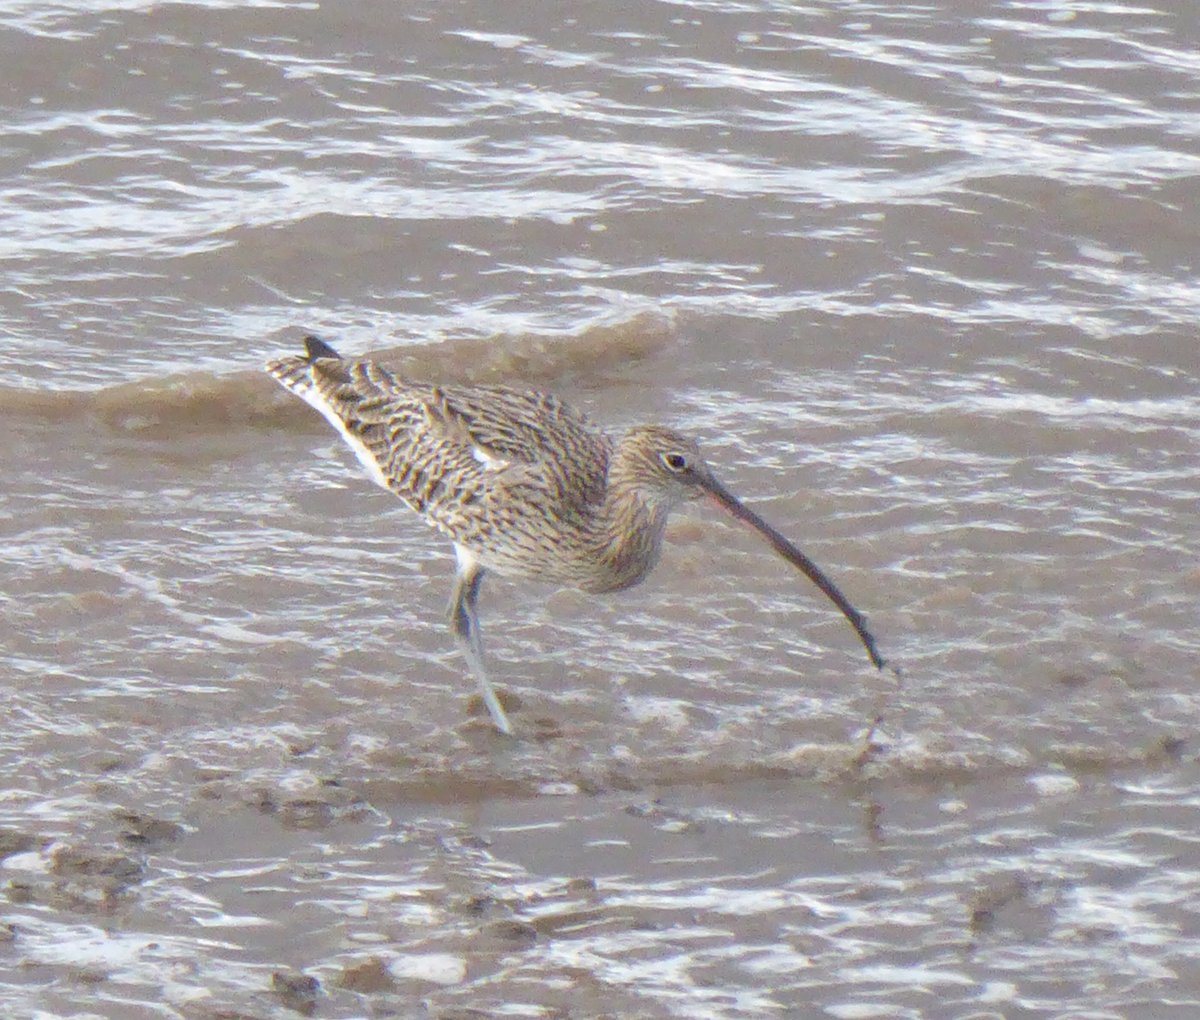 Great blog by @GrahamFAppleton on use of GPS trackers to explore #curlew migration flight pals & paths. My pic of curlew sea bathing at @WWTCaerlaverock 2021 @WaderStudy @RamsarConv @waderquest @CurlewSLakes @curlewrecovery @nature_scot #BirdsOfTwitter #birds @GlobalFlyway